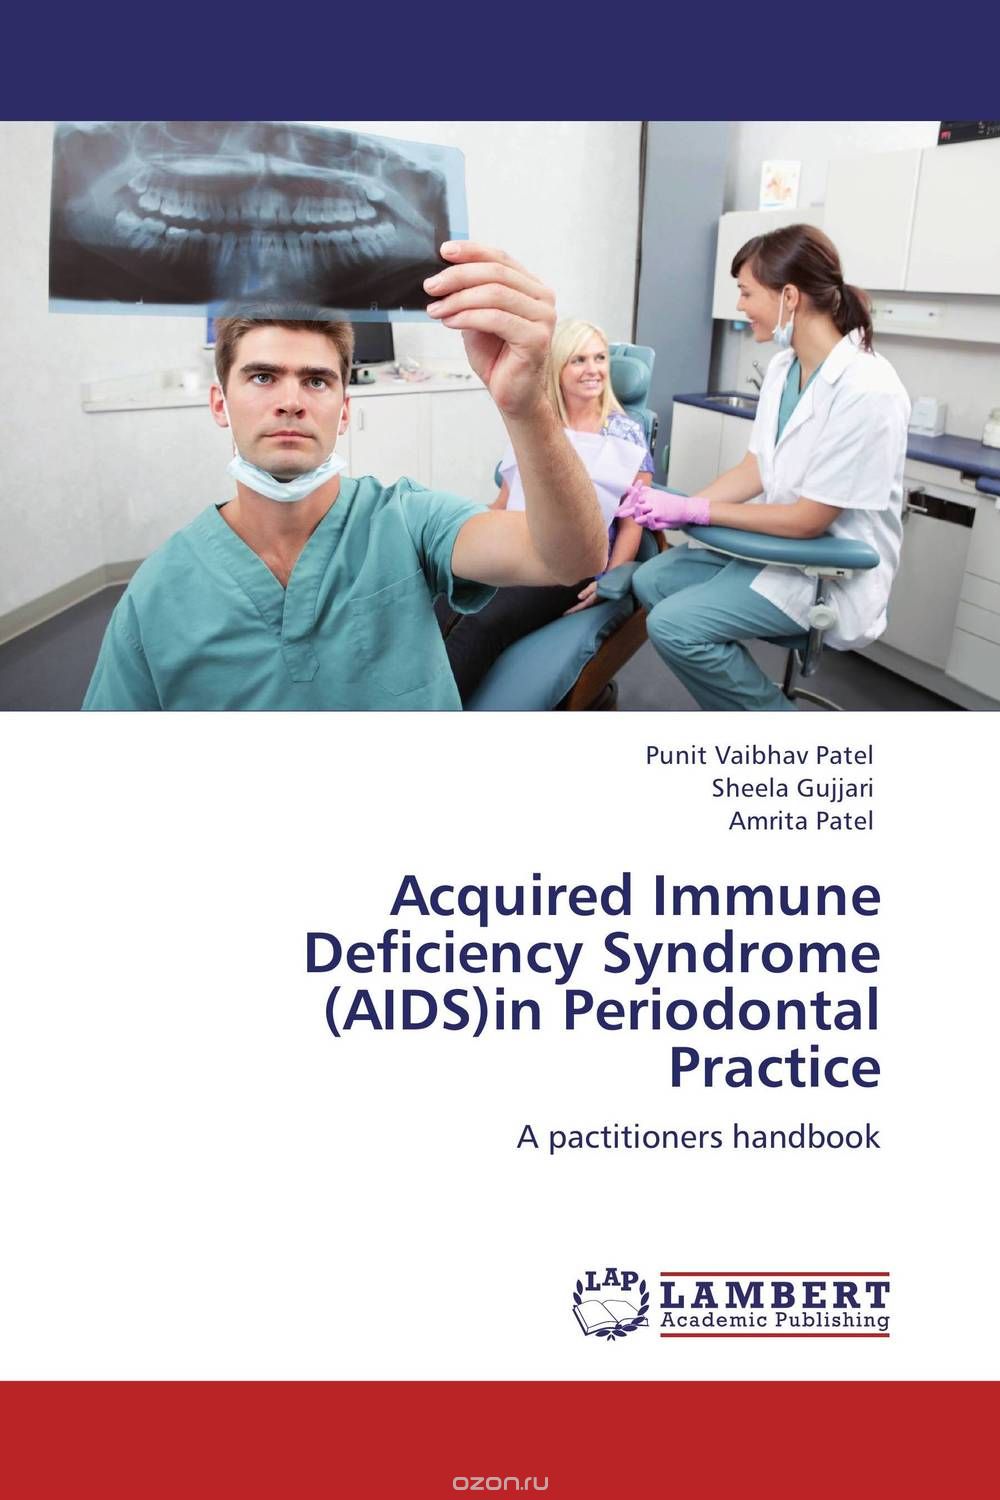 Acquired Immune Deficiency Syndrome (AIDS)in Periodontal Practice